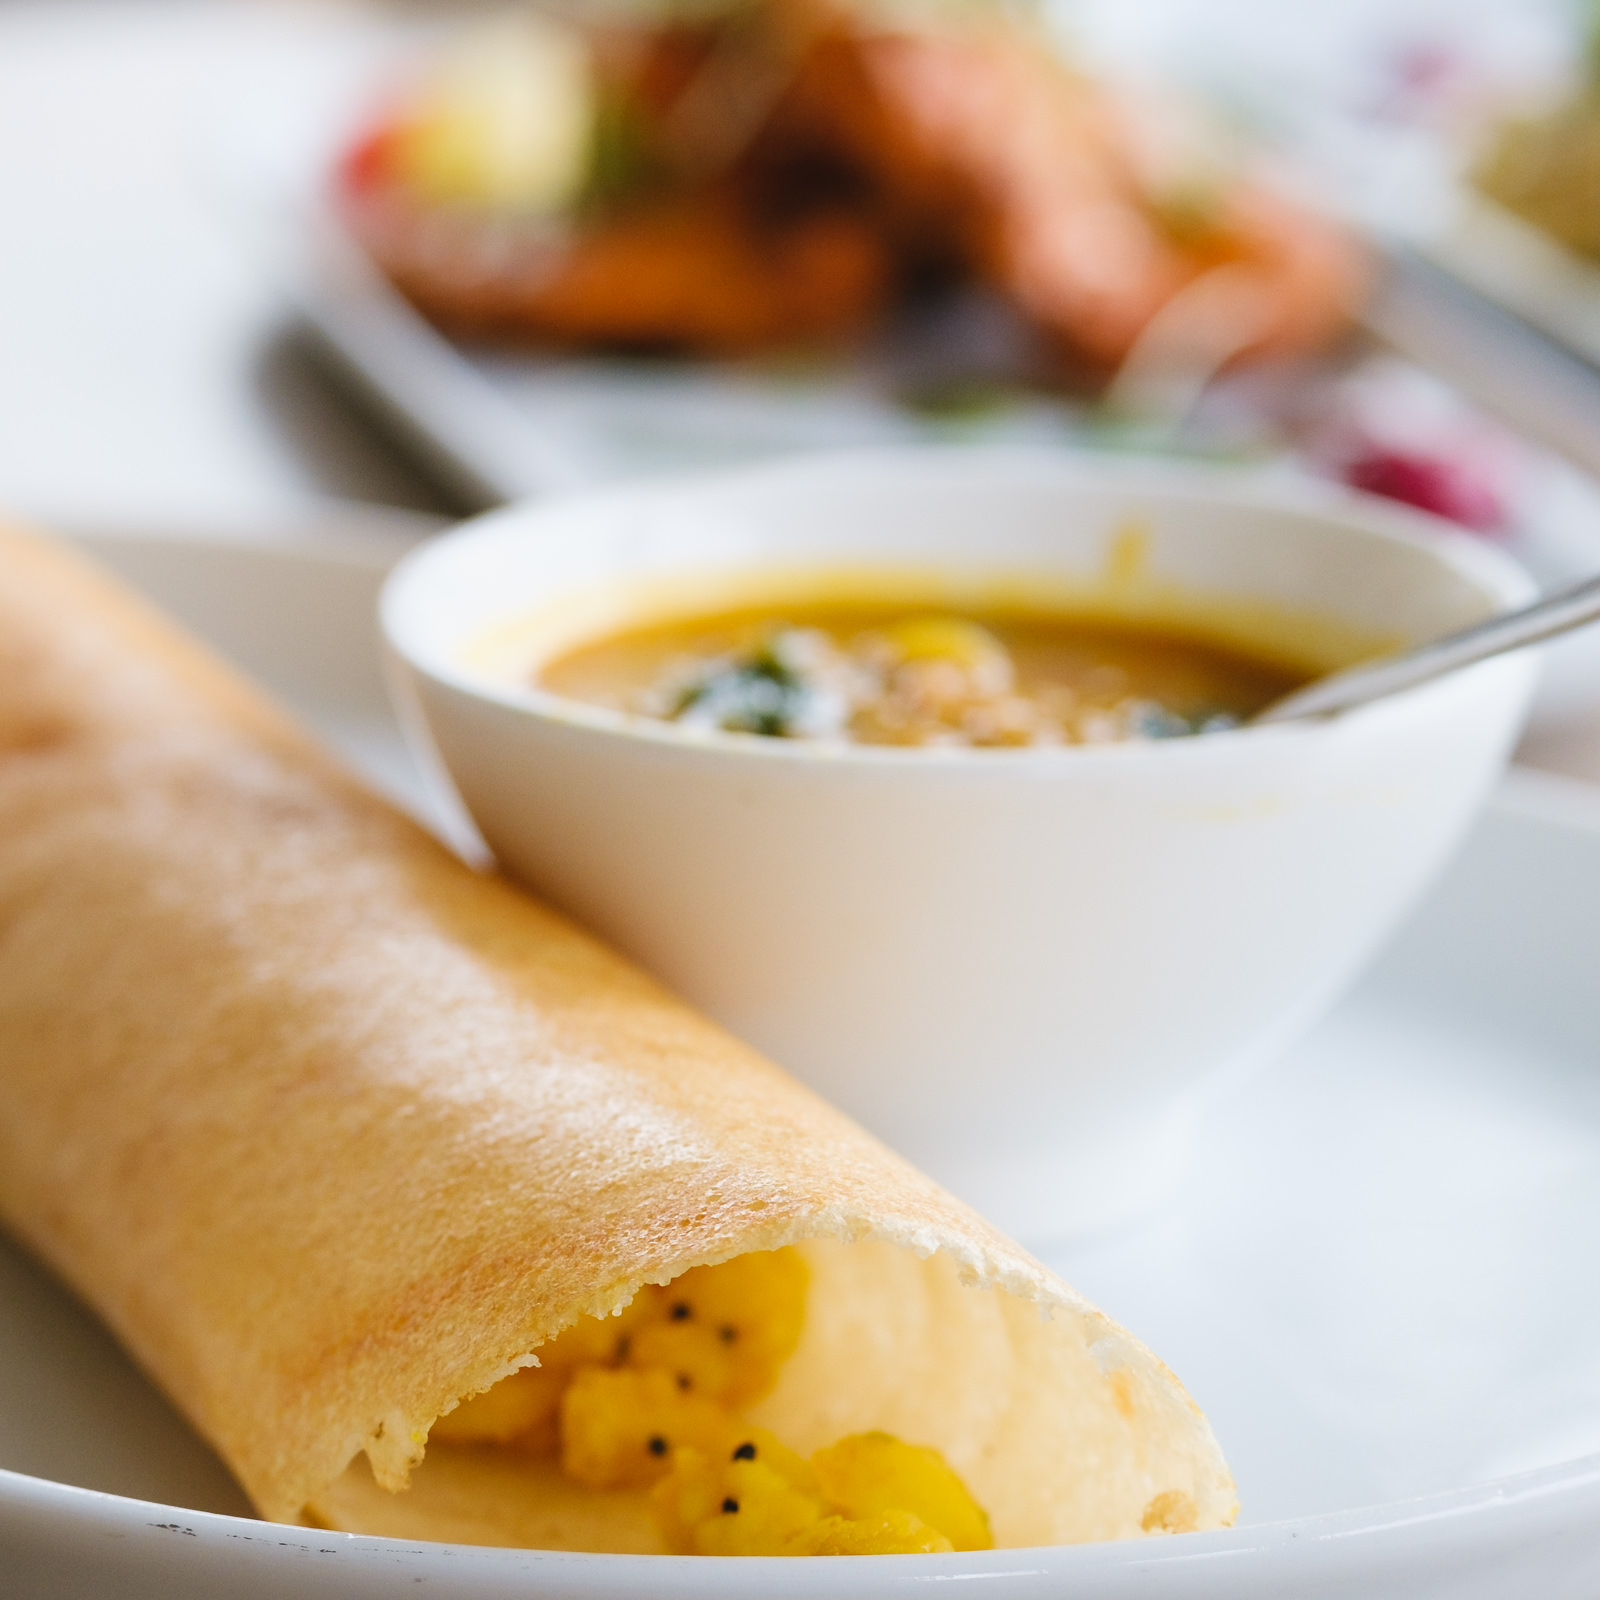 Corporate marketing photography with sample dishes at Mantra Indian Restaurant in Bath